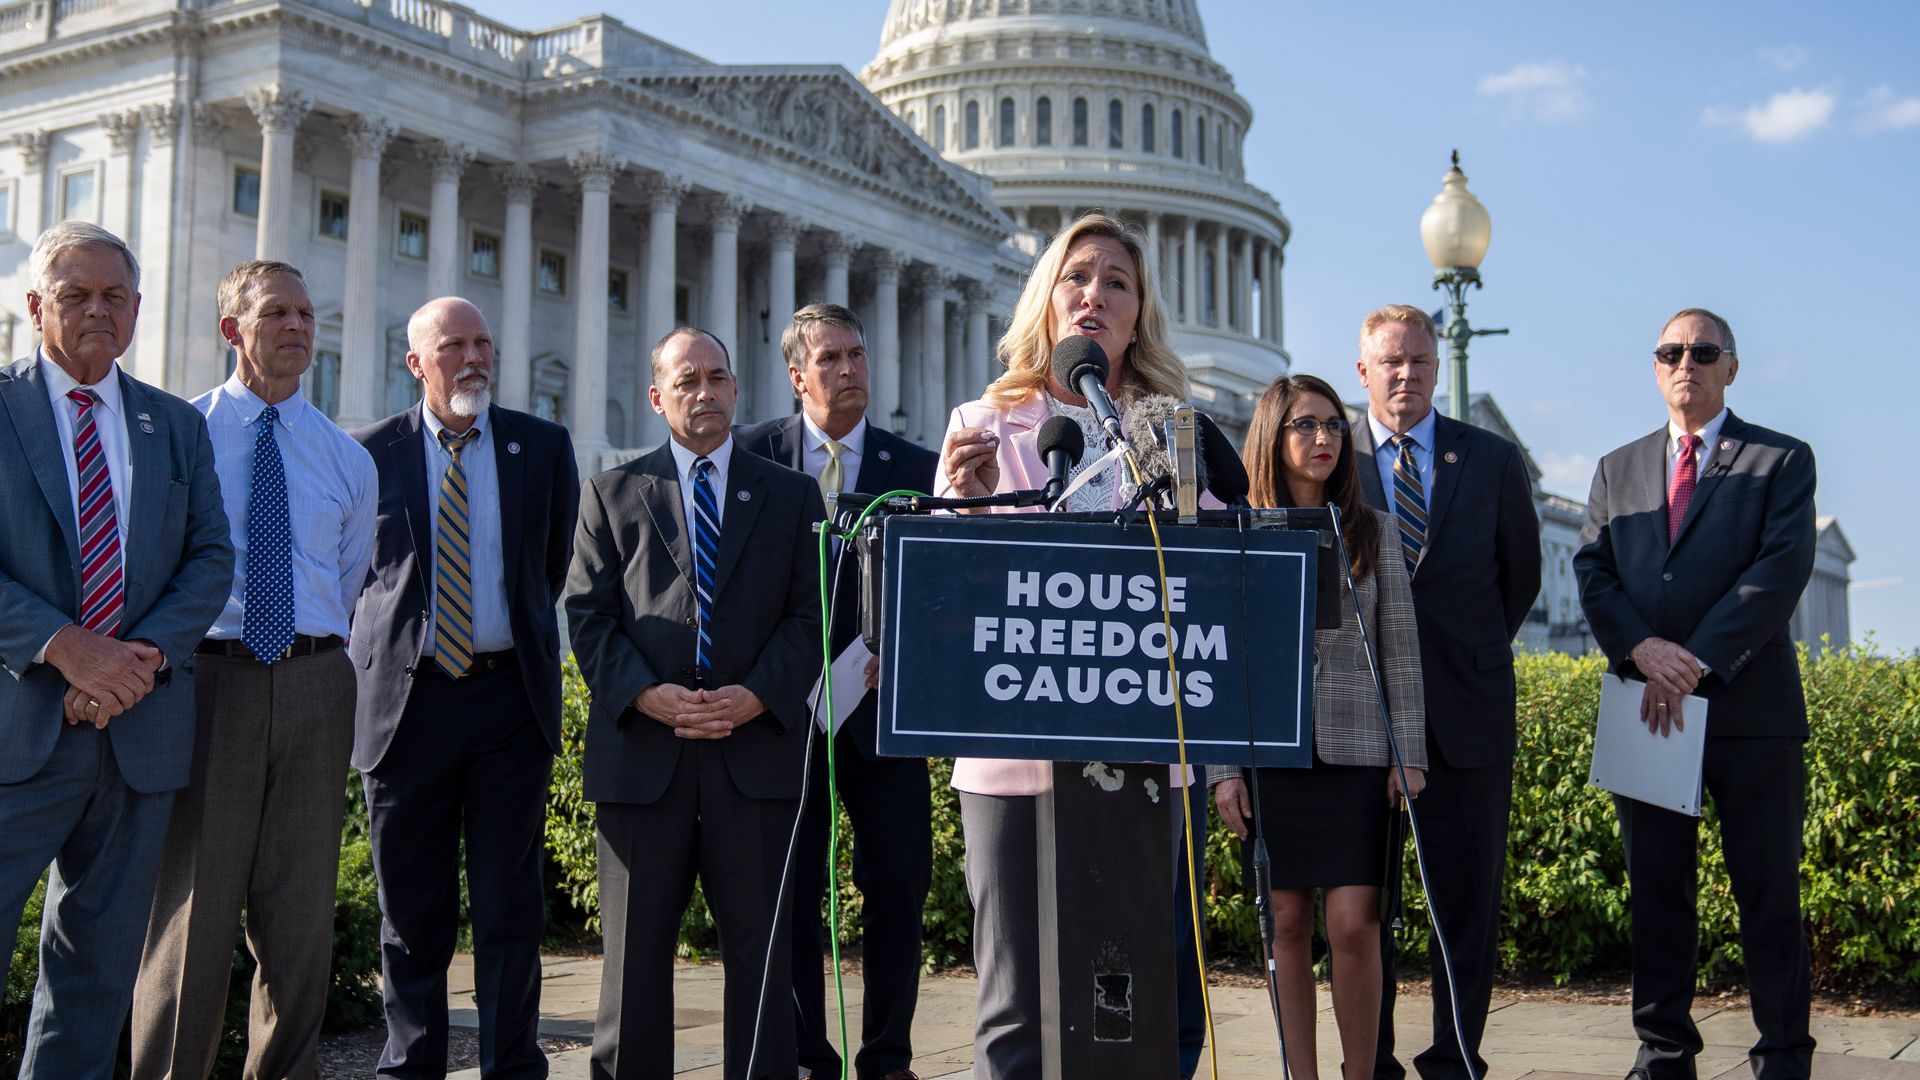 Congress needs to pass a new budget, and listening to the House Freedom Caucus is key to making meaningful progress.